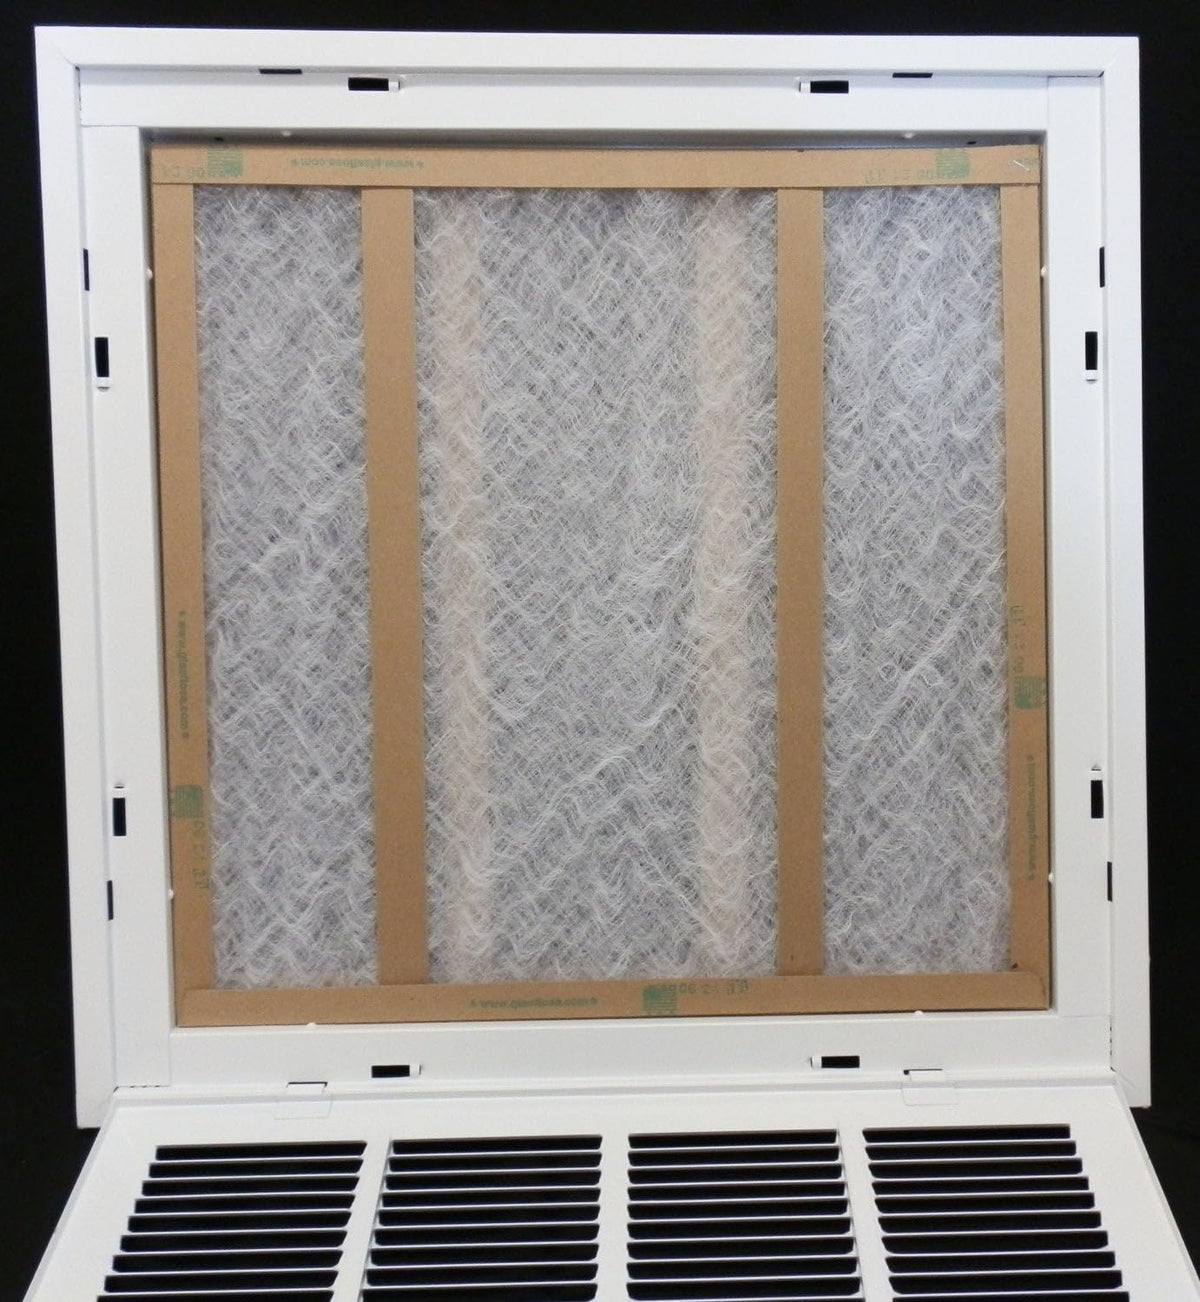 18&quot; X 20&quot; Steel Return Air Filter Grille for 1&quot; Filter - Removable Frame - [Outer Dimensions: 20 5/8&quot; X 22 5/8&quot;]